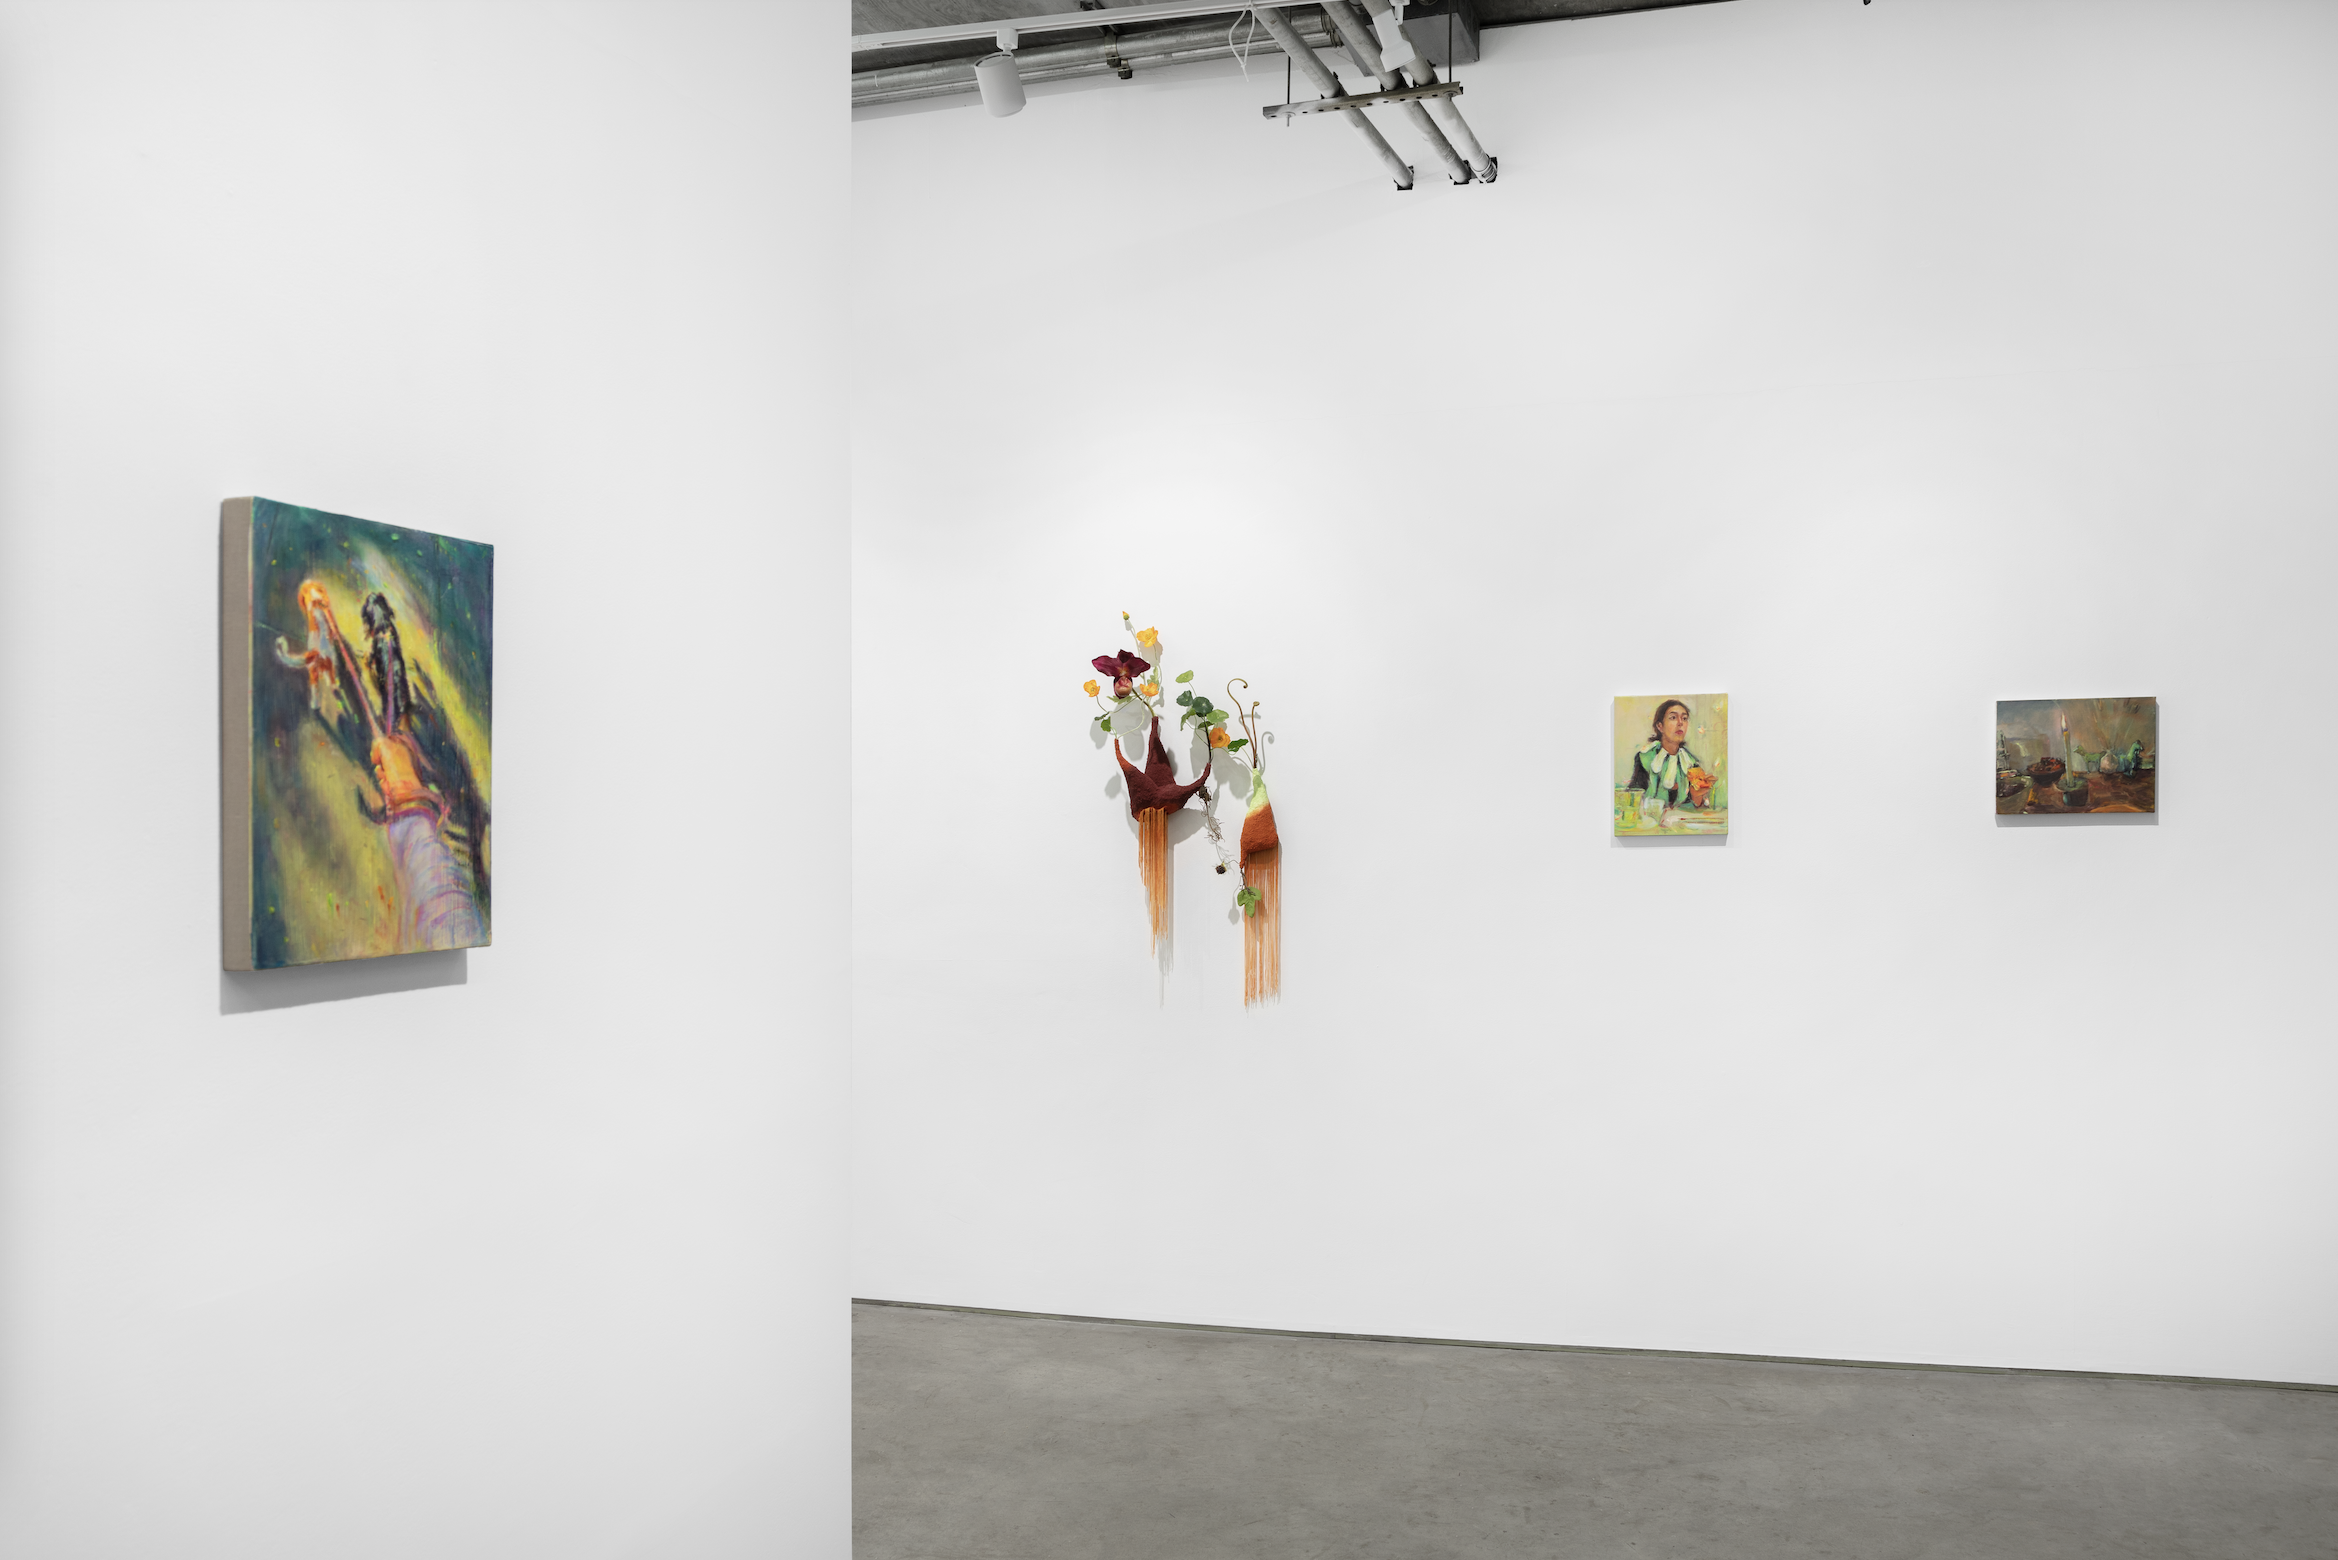  ‘as long as you want’ Two-Person Exhibition with Julia Blume  My Pet Ram, New York City February 24 - March 26, 2023   Two Coats of Paint Review by Jenny Zoe Casey  